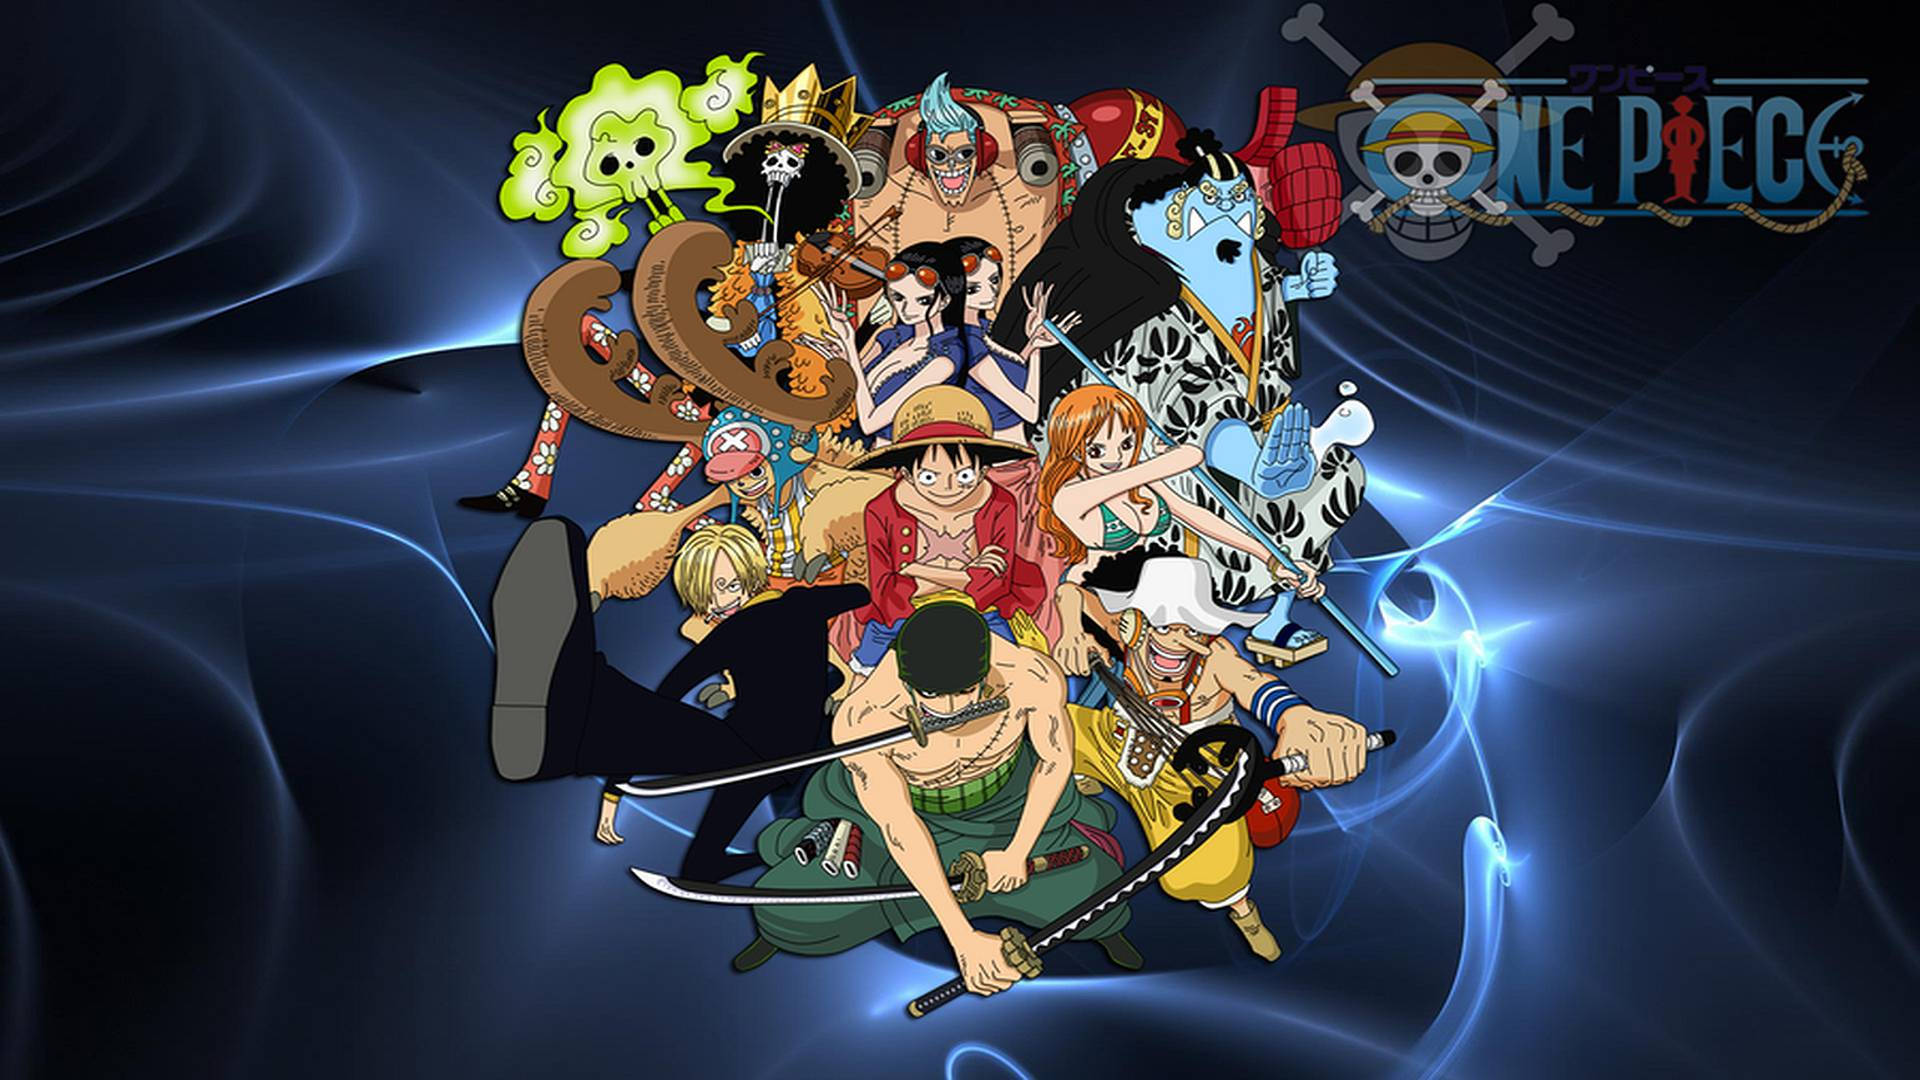 Luffy And The Strawhat Pirates - The Legendary Adventure Through The Grand Line Begins Background